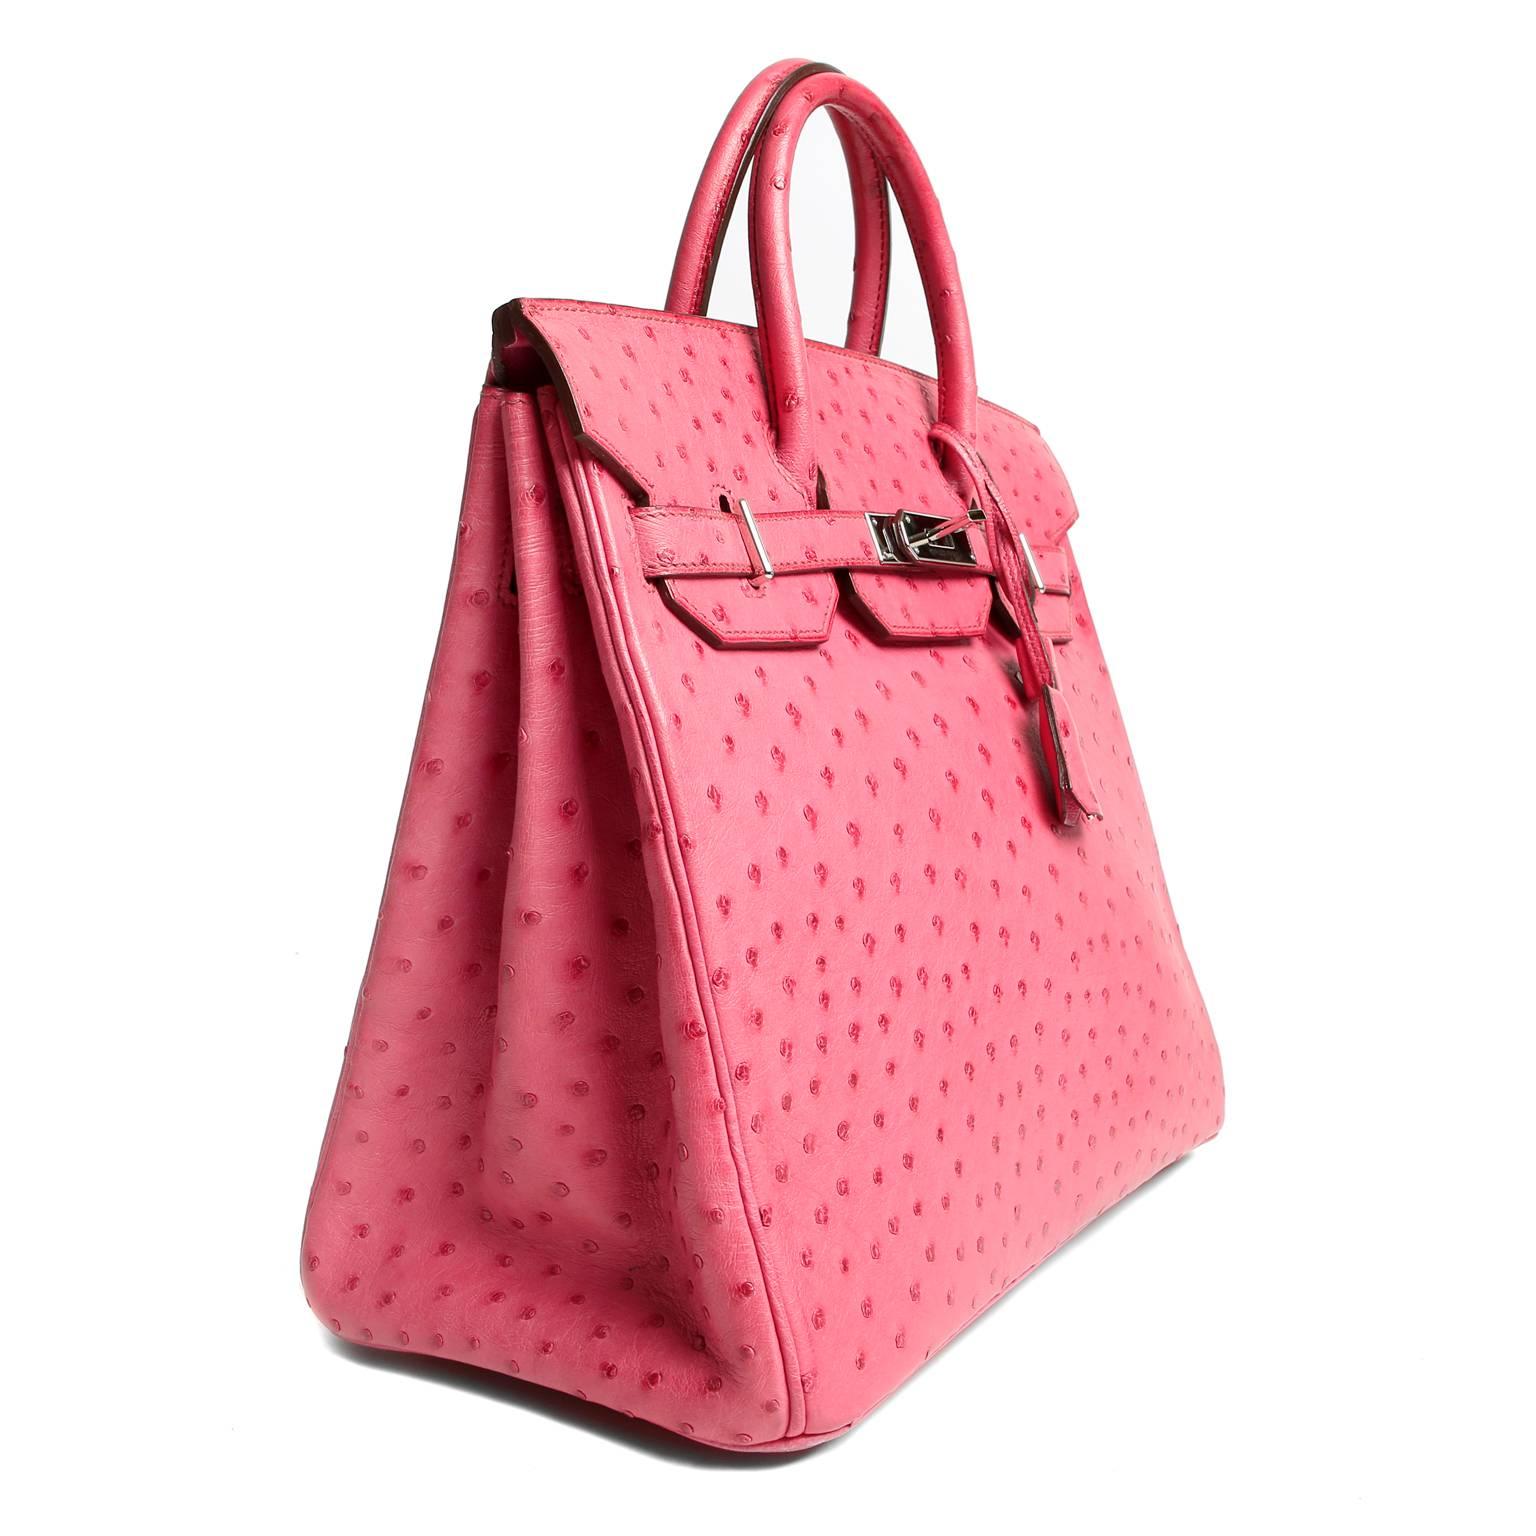 Hermès 32 cm Fuchsia Pink Ostrich HAC Birkin- PRISTINE
Considered the ultimate luxury item the world over and hand stitched by skilled craftsmen, wait lists of a year or more are commonplace for Hermès bags. The HAC (Haut a Courroies or “high